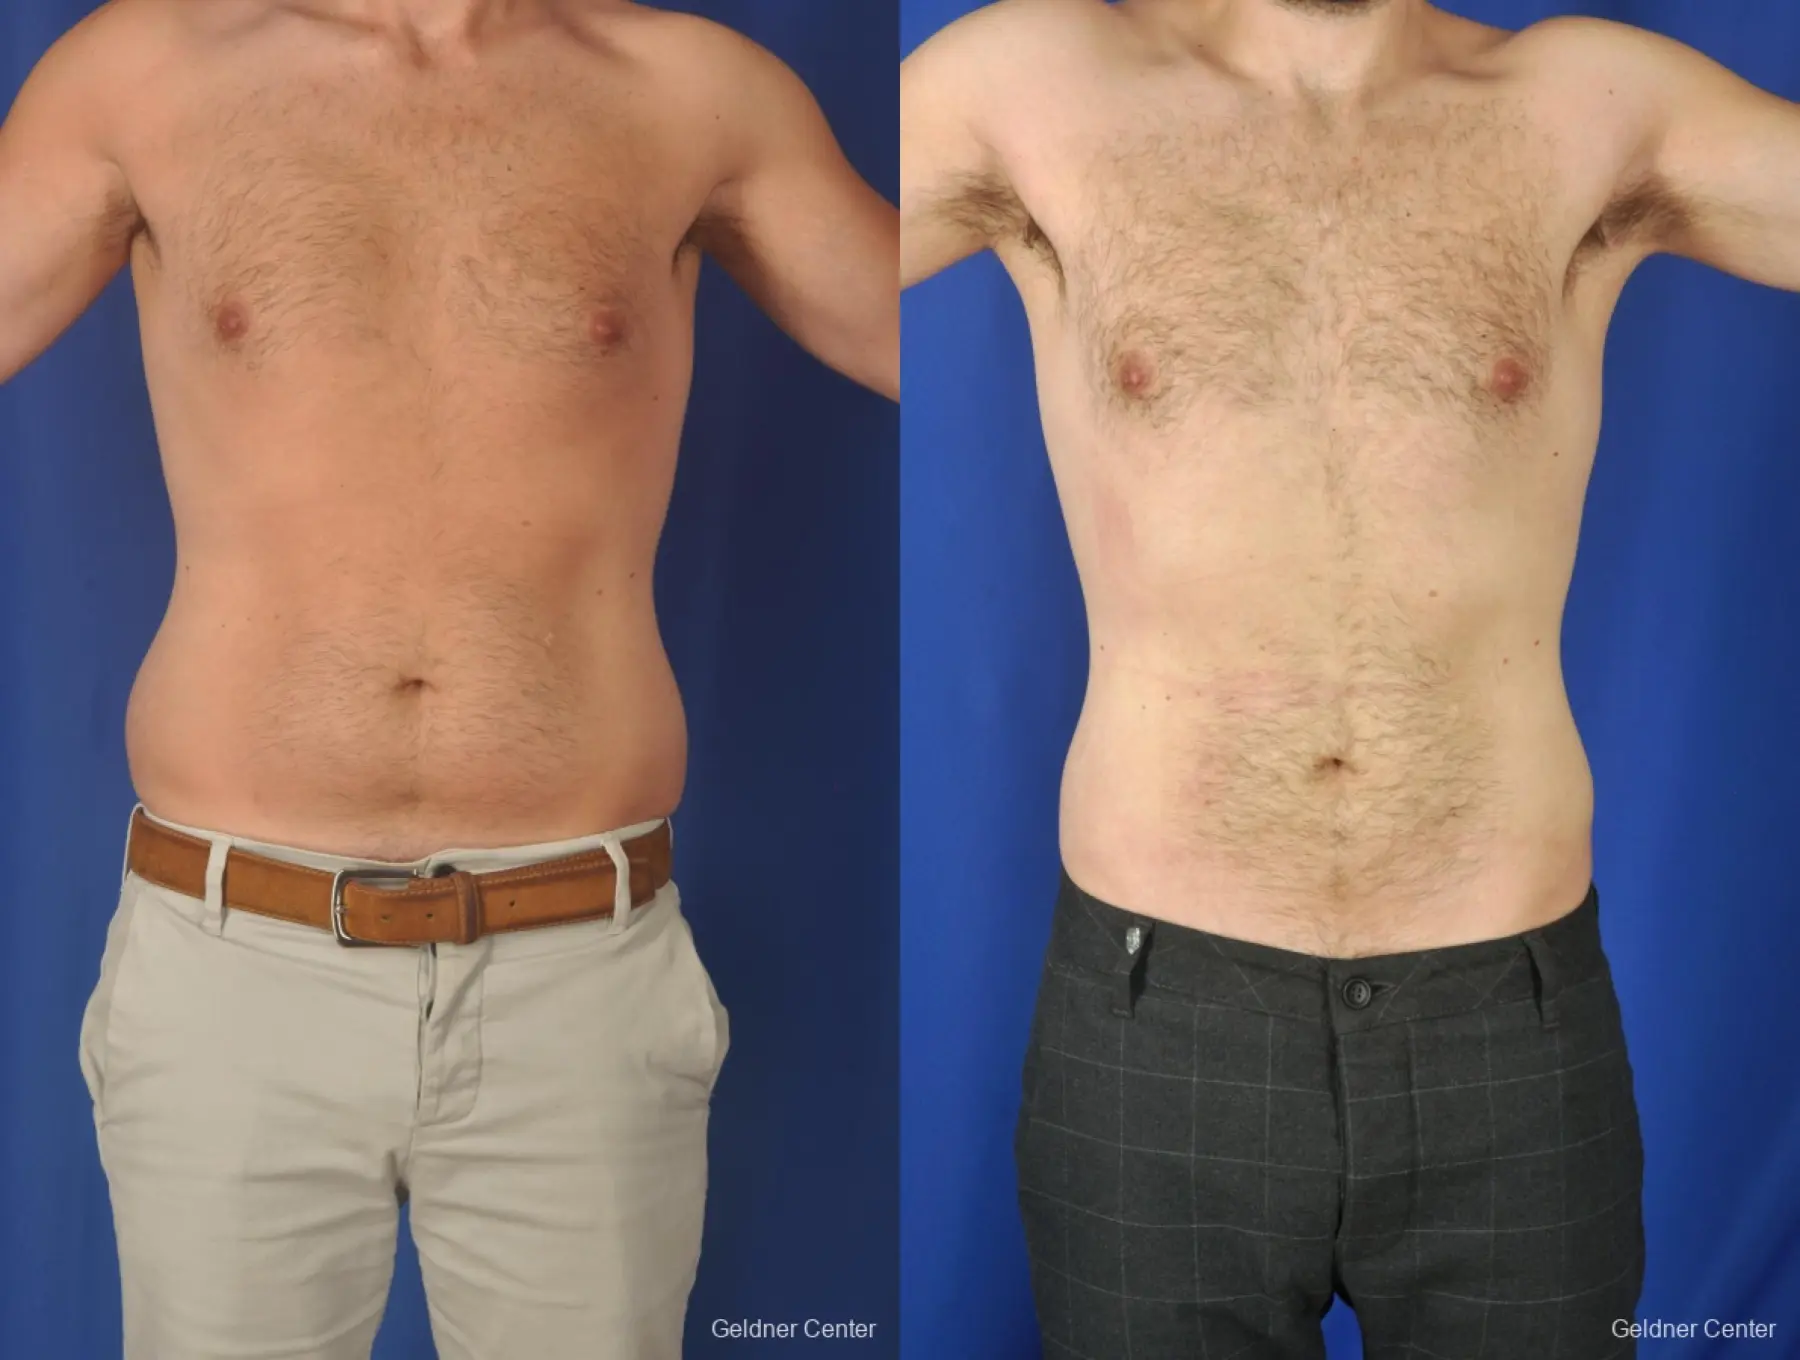 Liposuction Before And After Y98ObArsAc1A Highres.webp